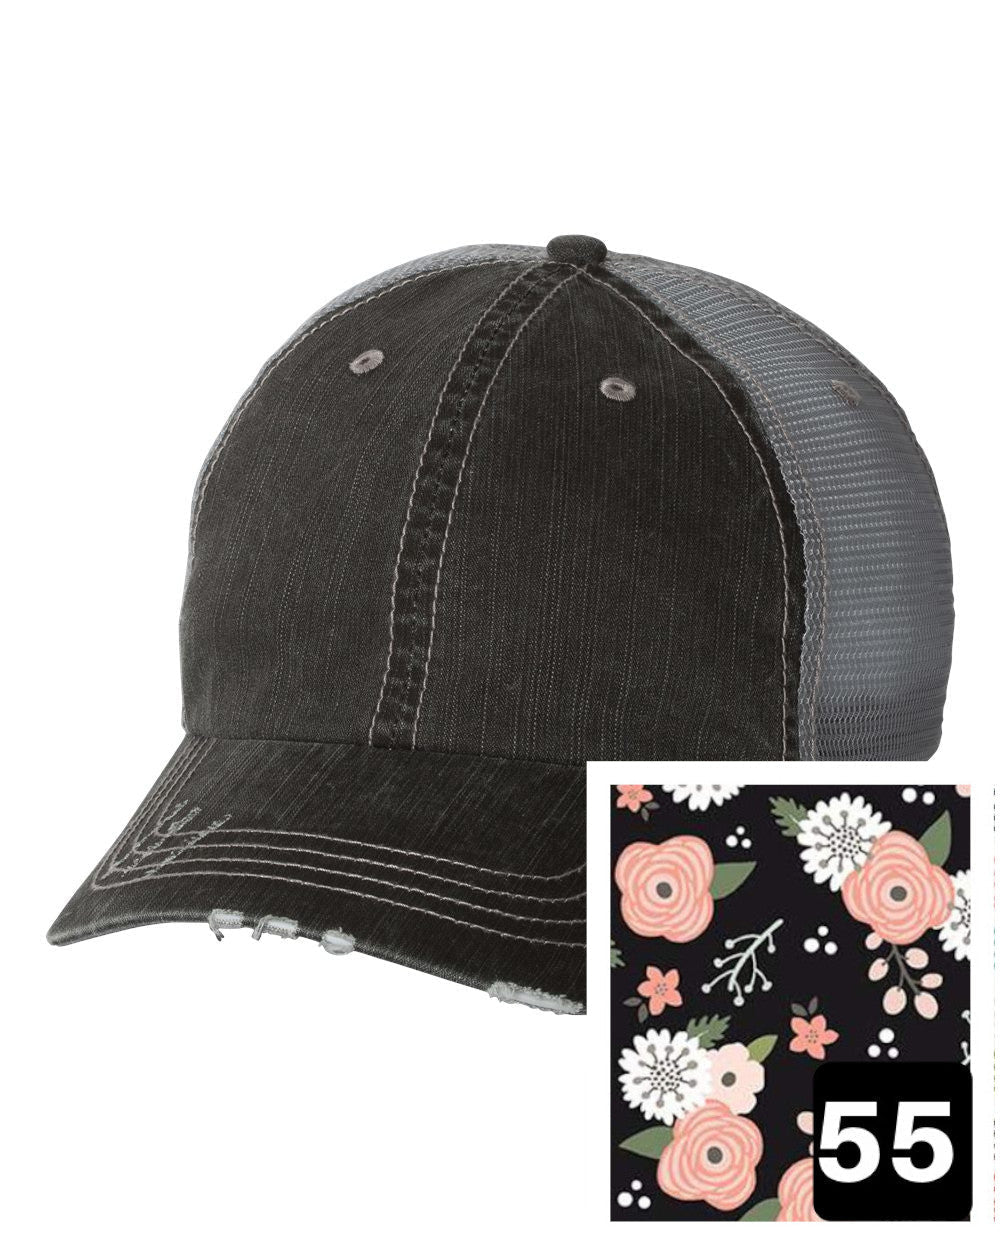 gray distressed trucker hat with petite floral on navy fabric state of South Carolina